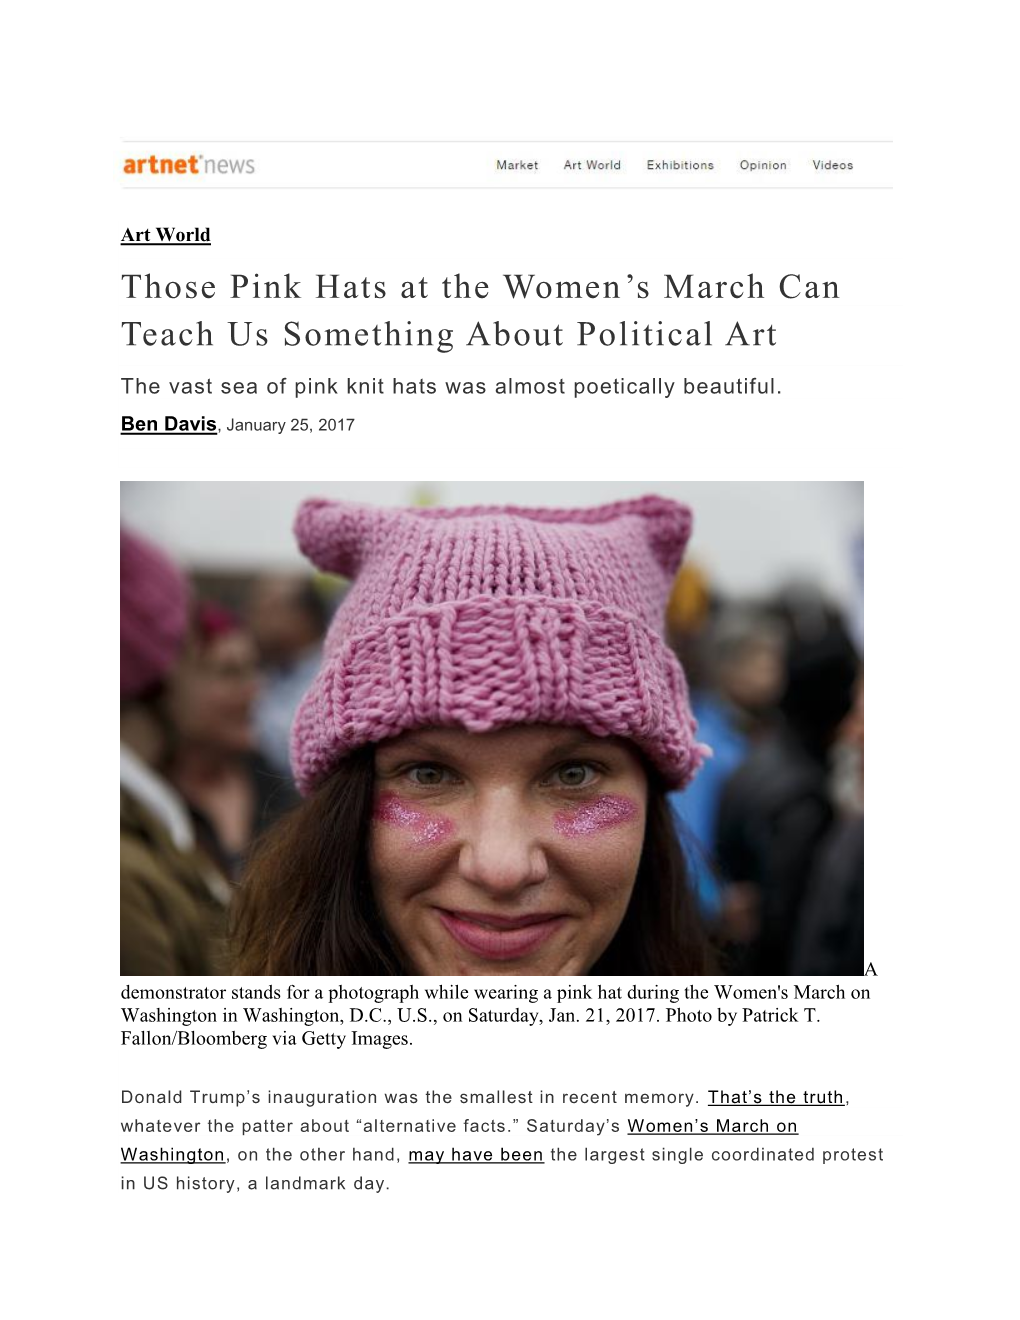 Those Pink Hats at the Women's March Can Teach Us Something